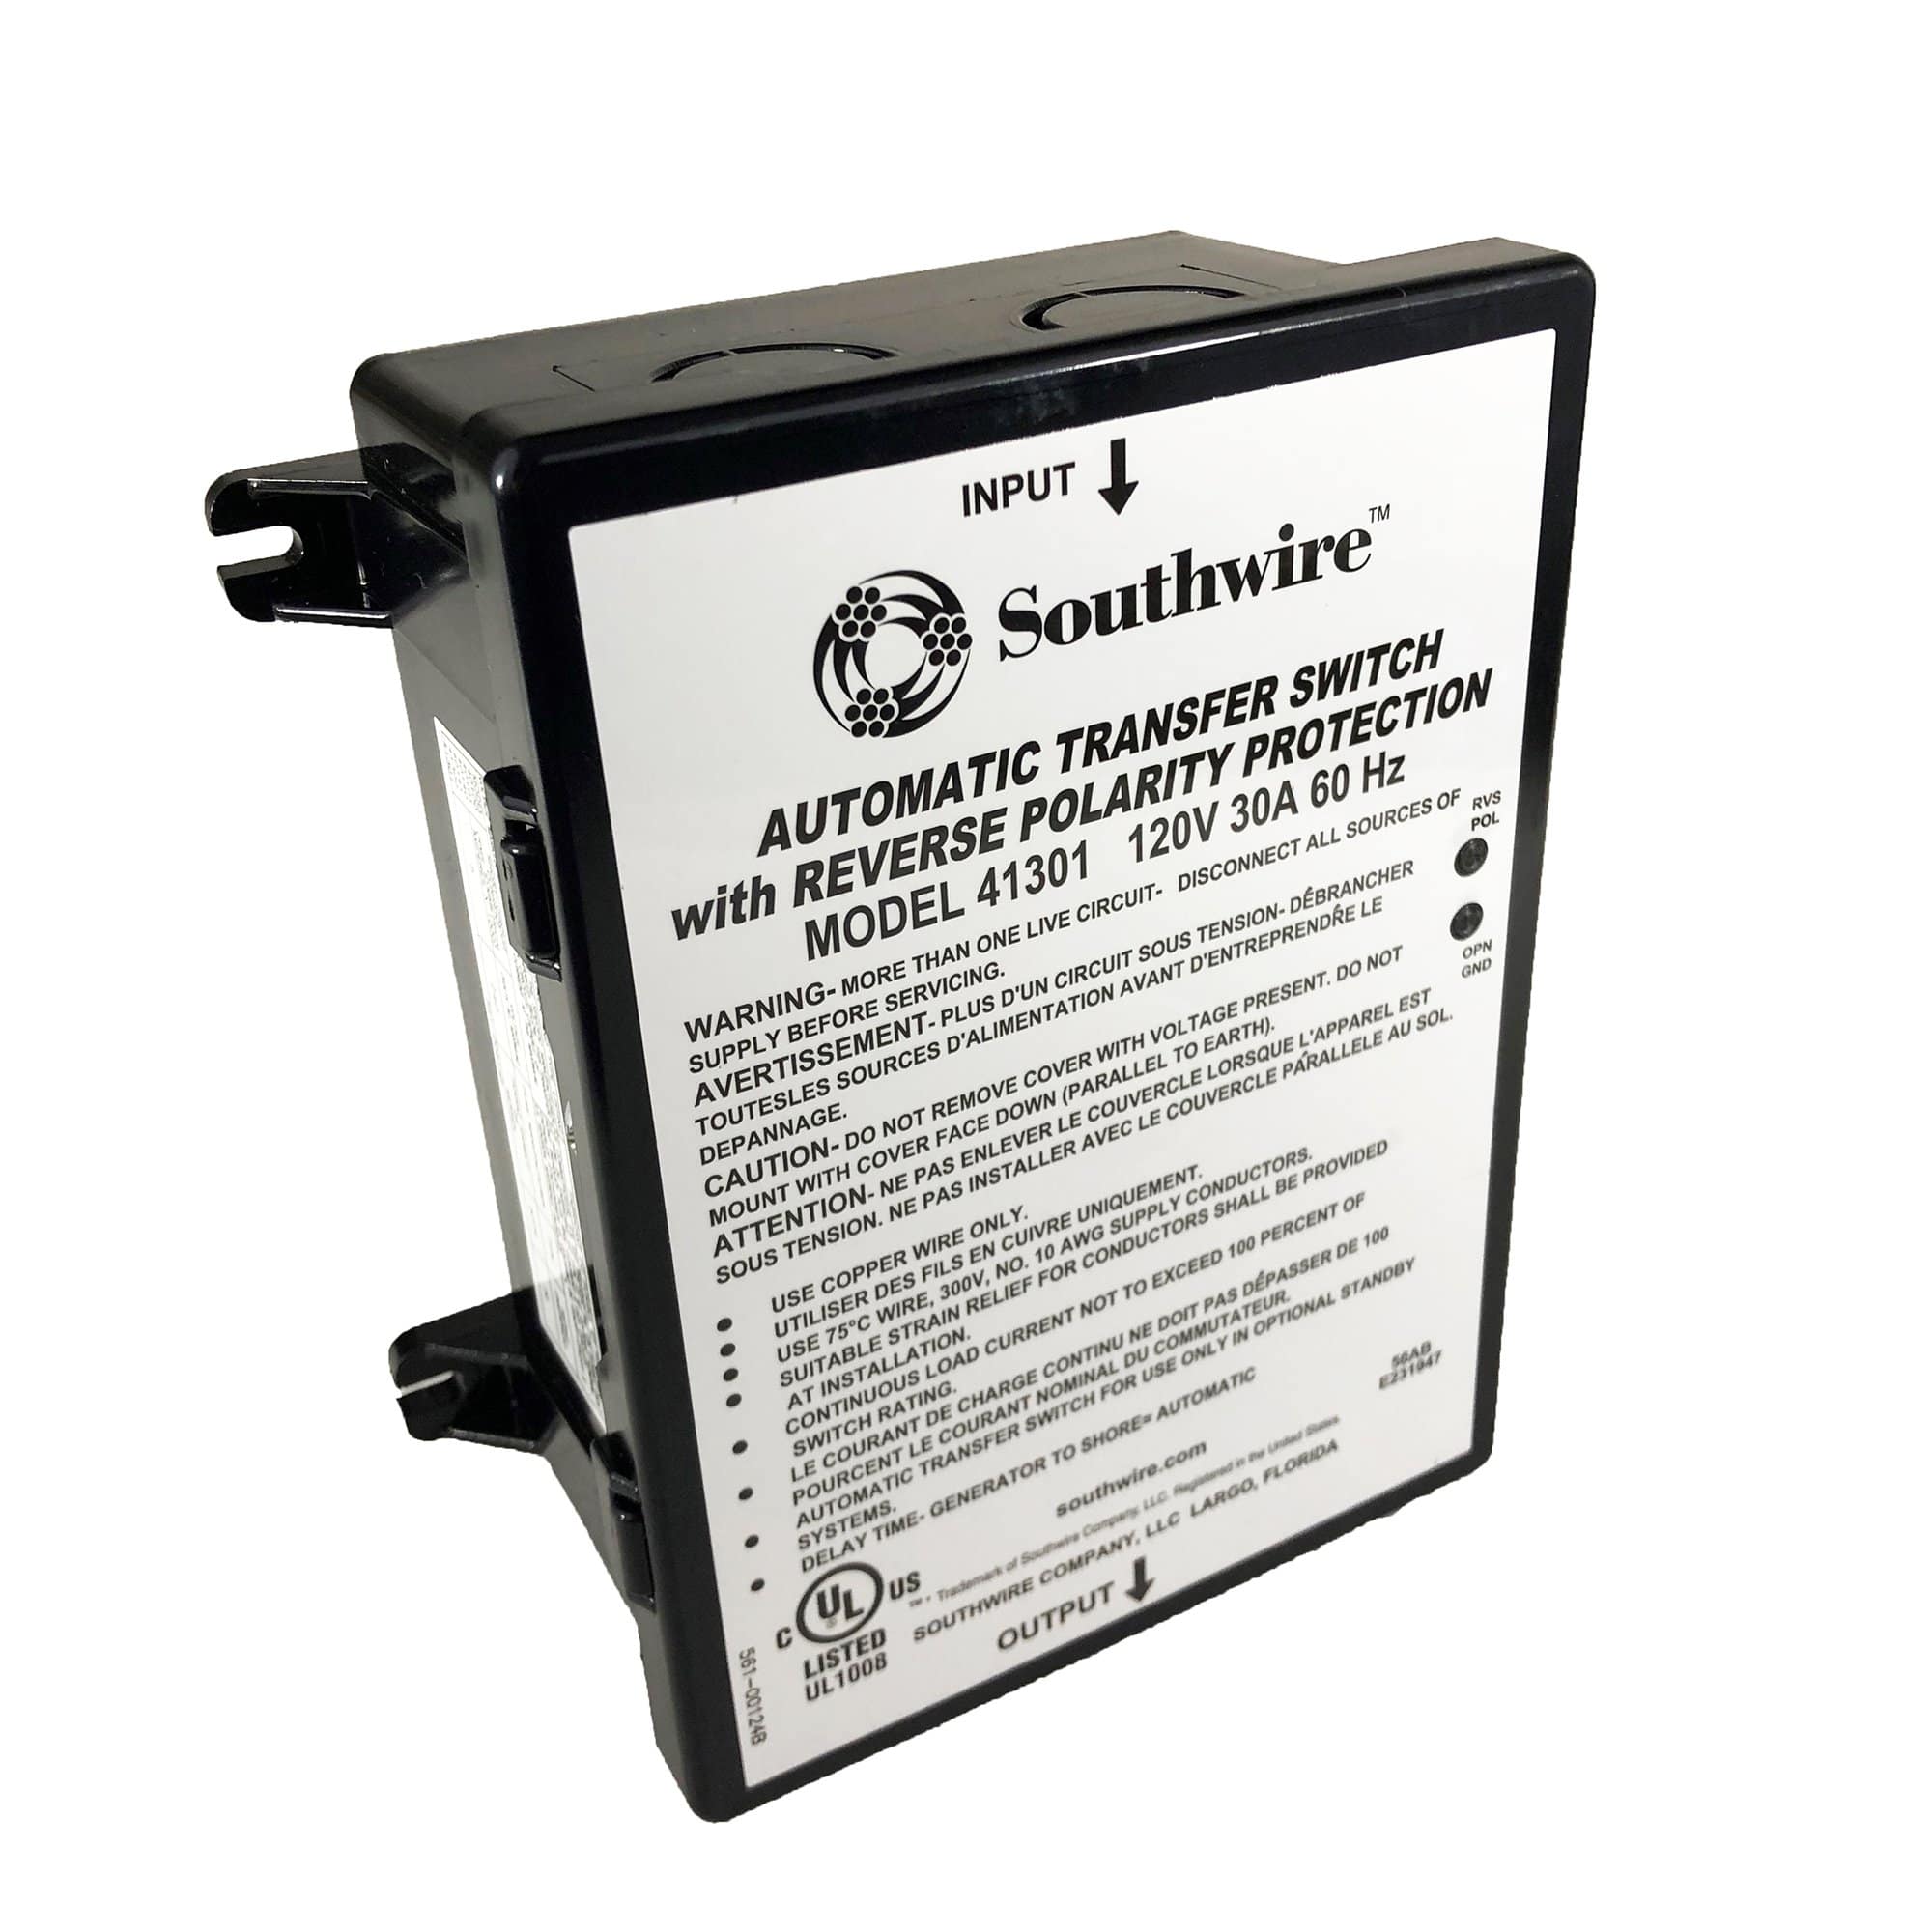 Southwire 41301 30A Reverse Polarity Transfer Switch